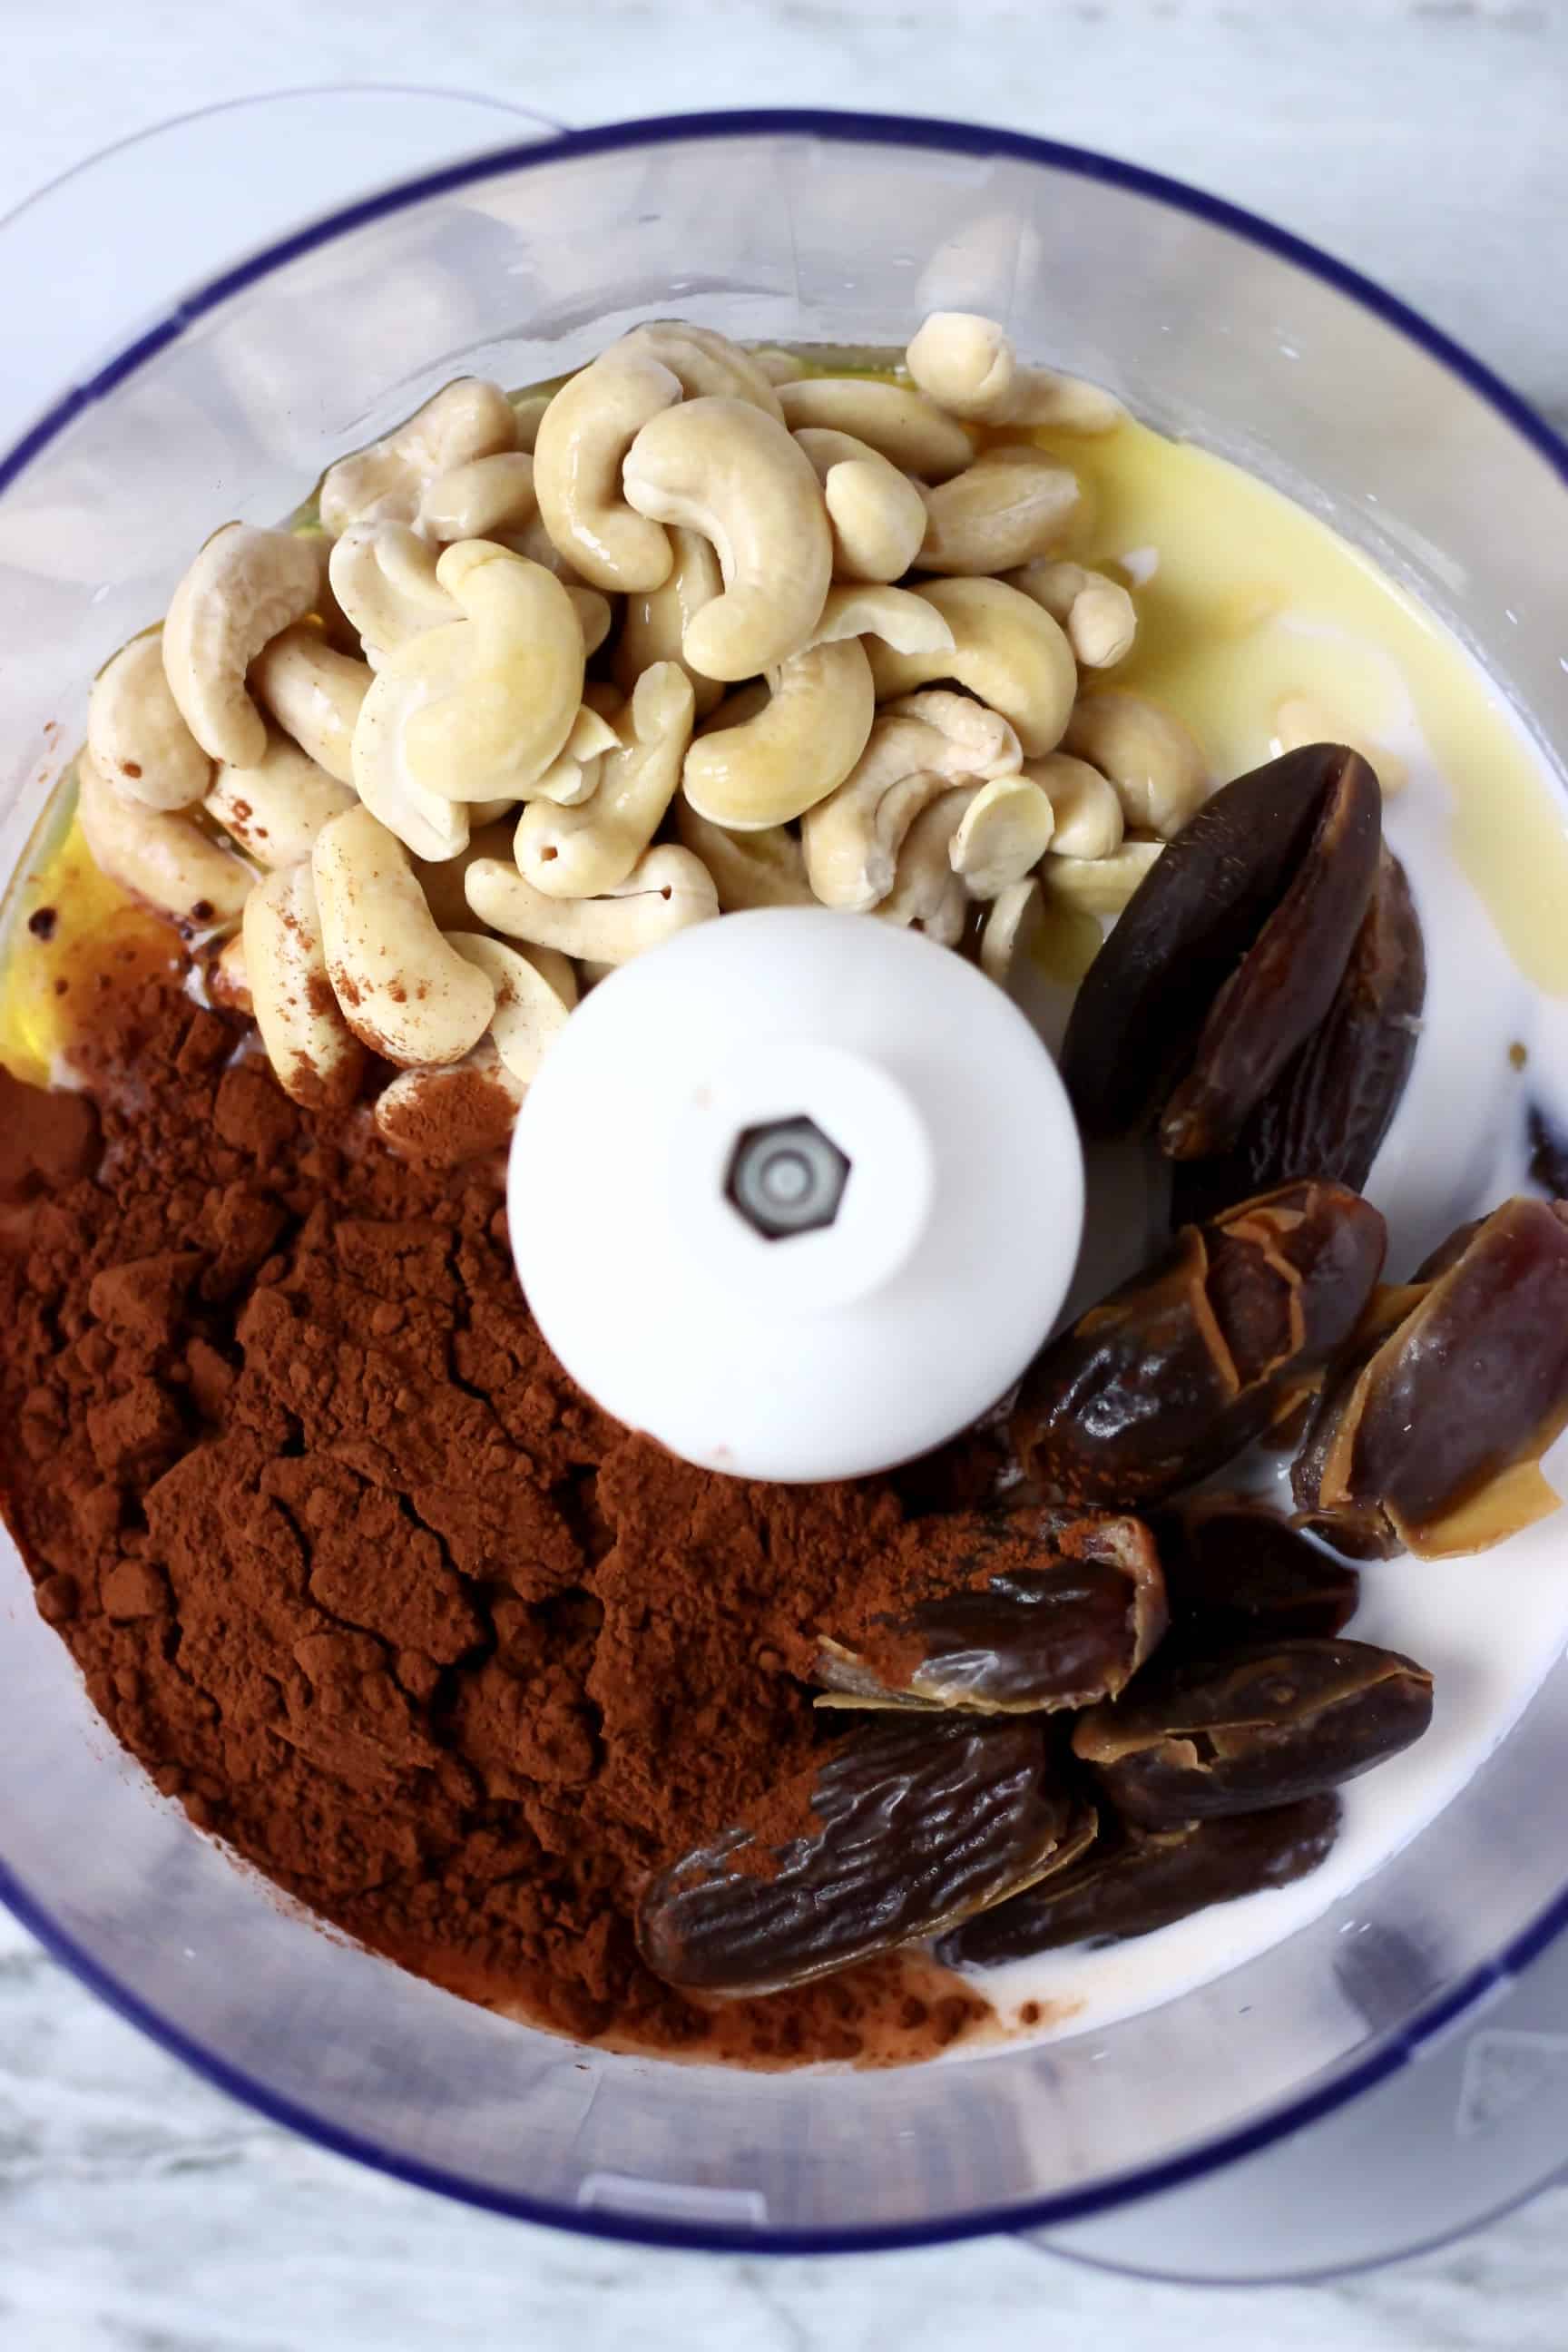 Cashew nuts, dates, cocoa powder and almond milk in a food processor